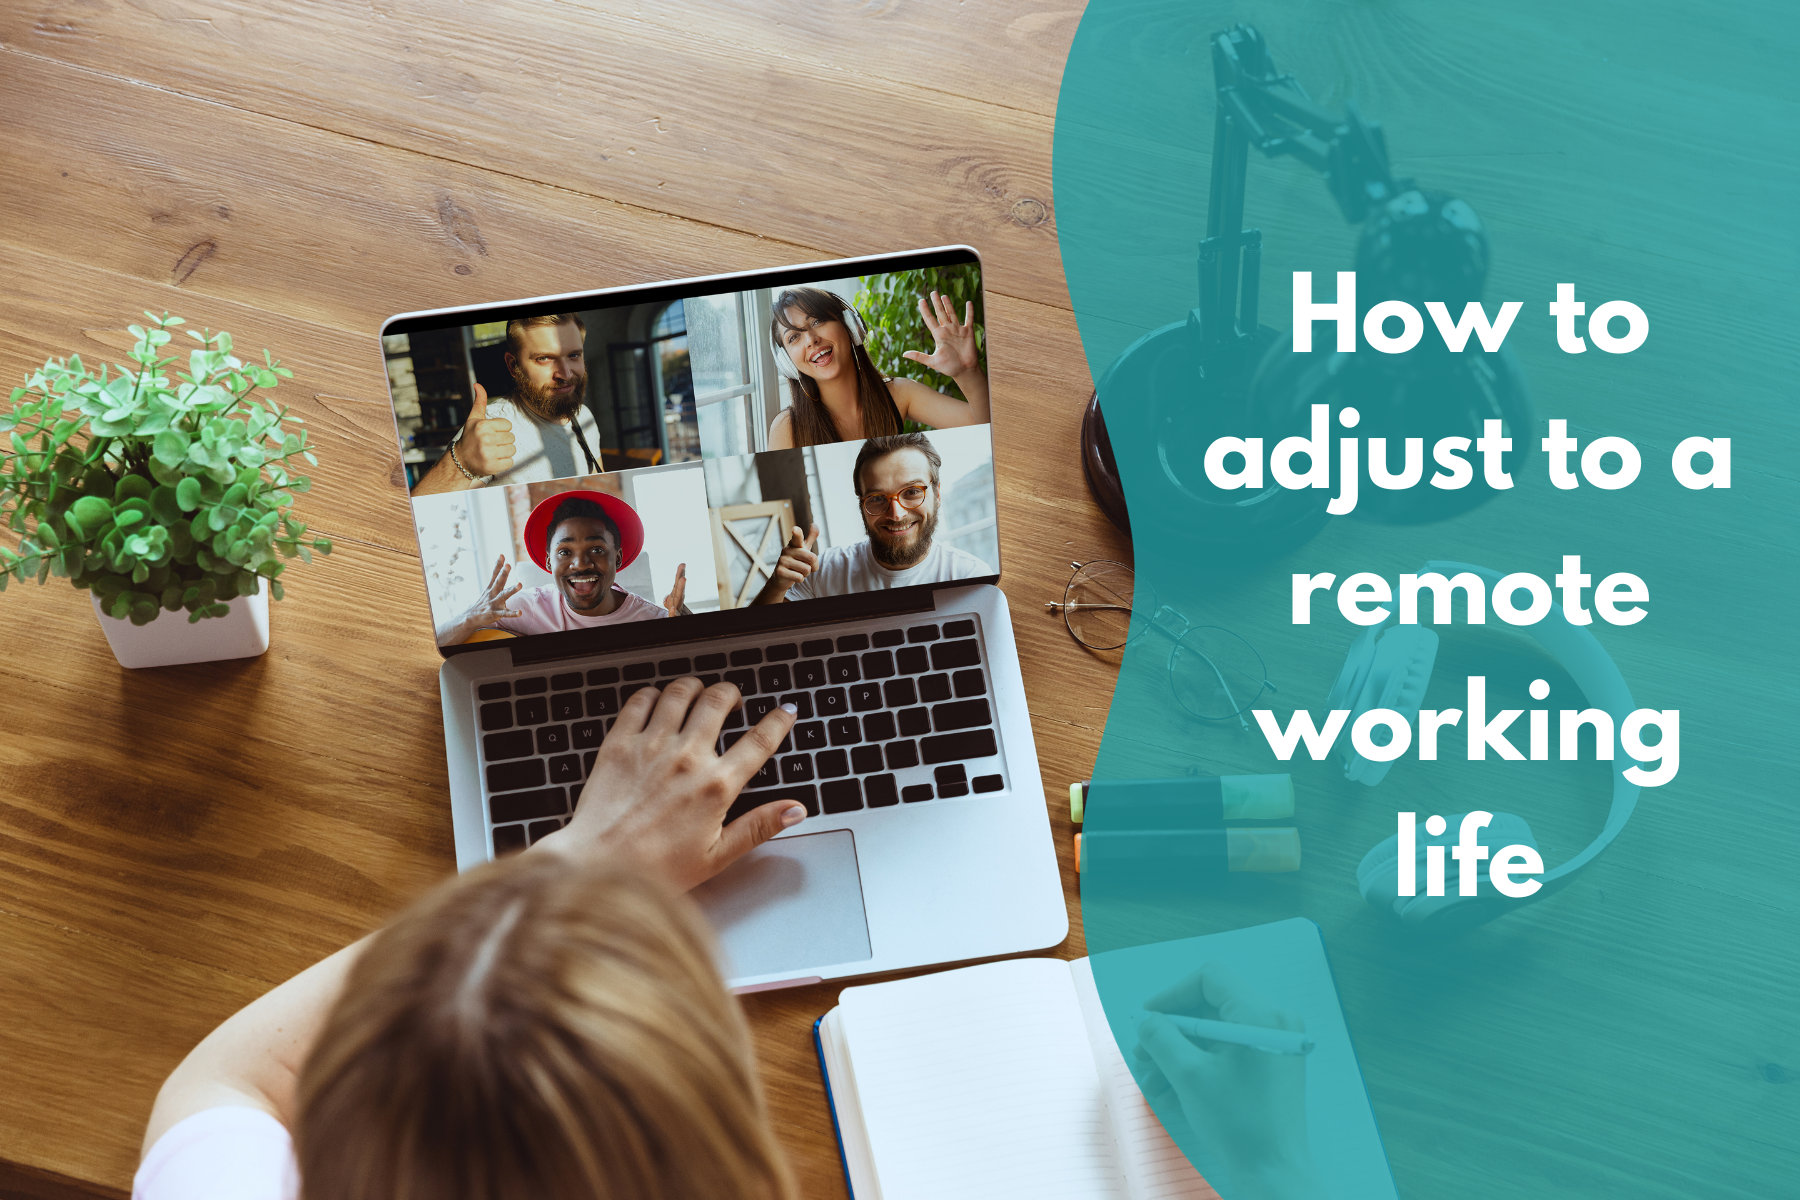 How to adjust to a remote working life